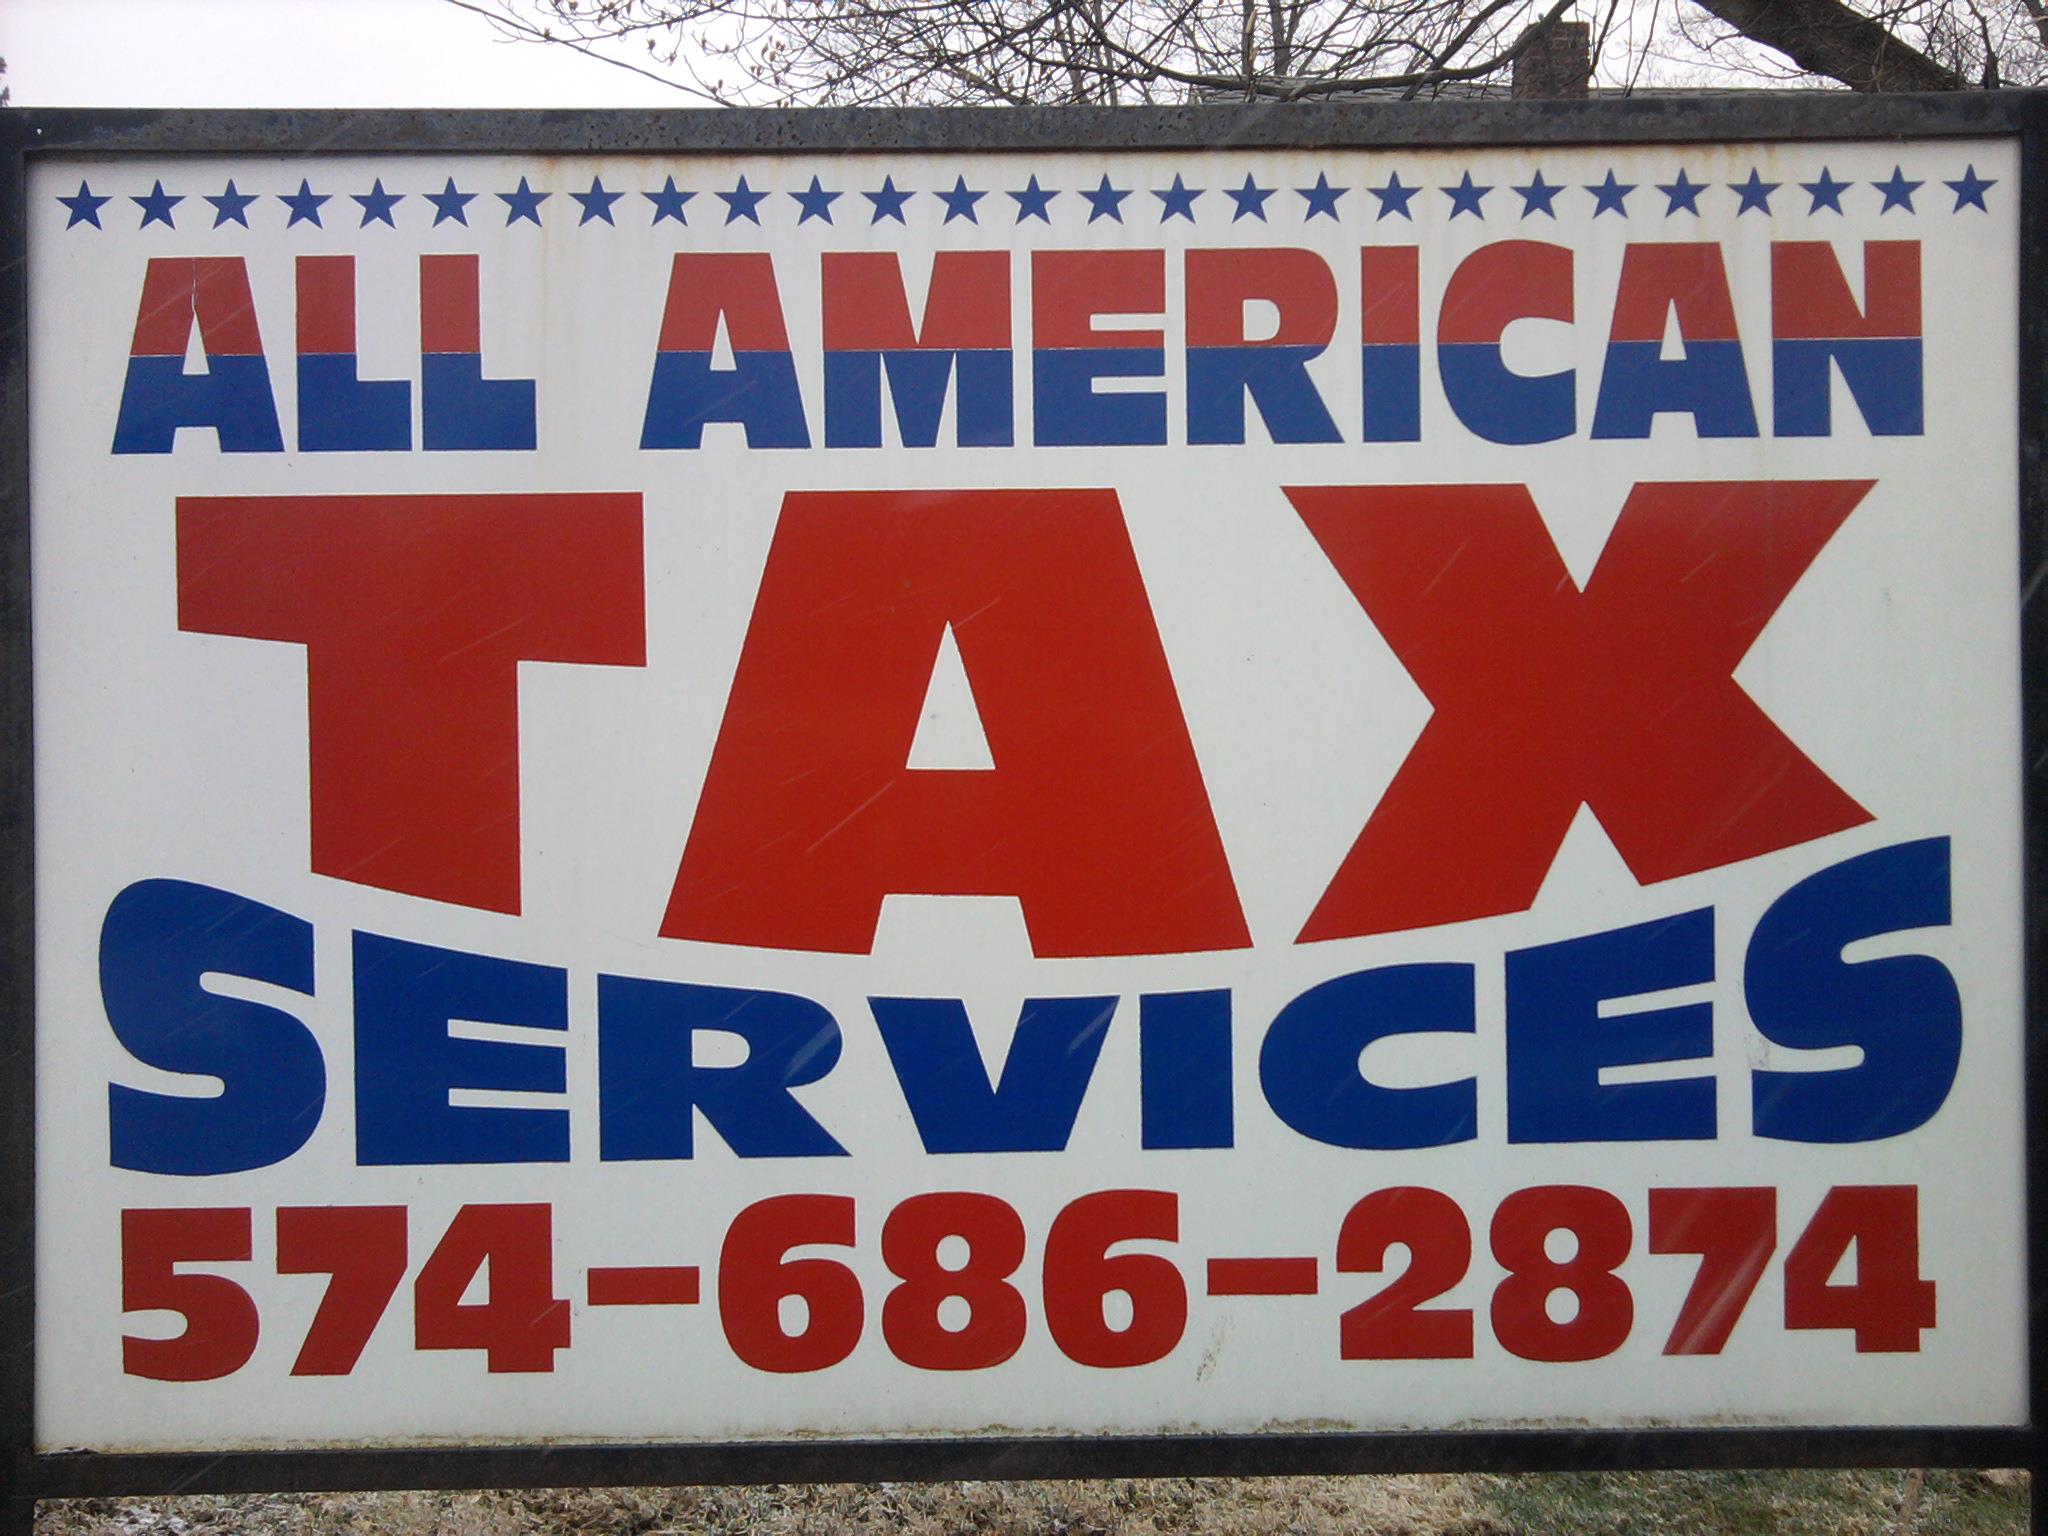 All-American Tax Services